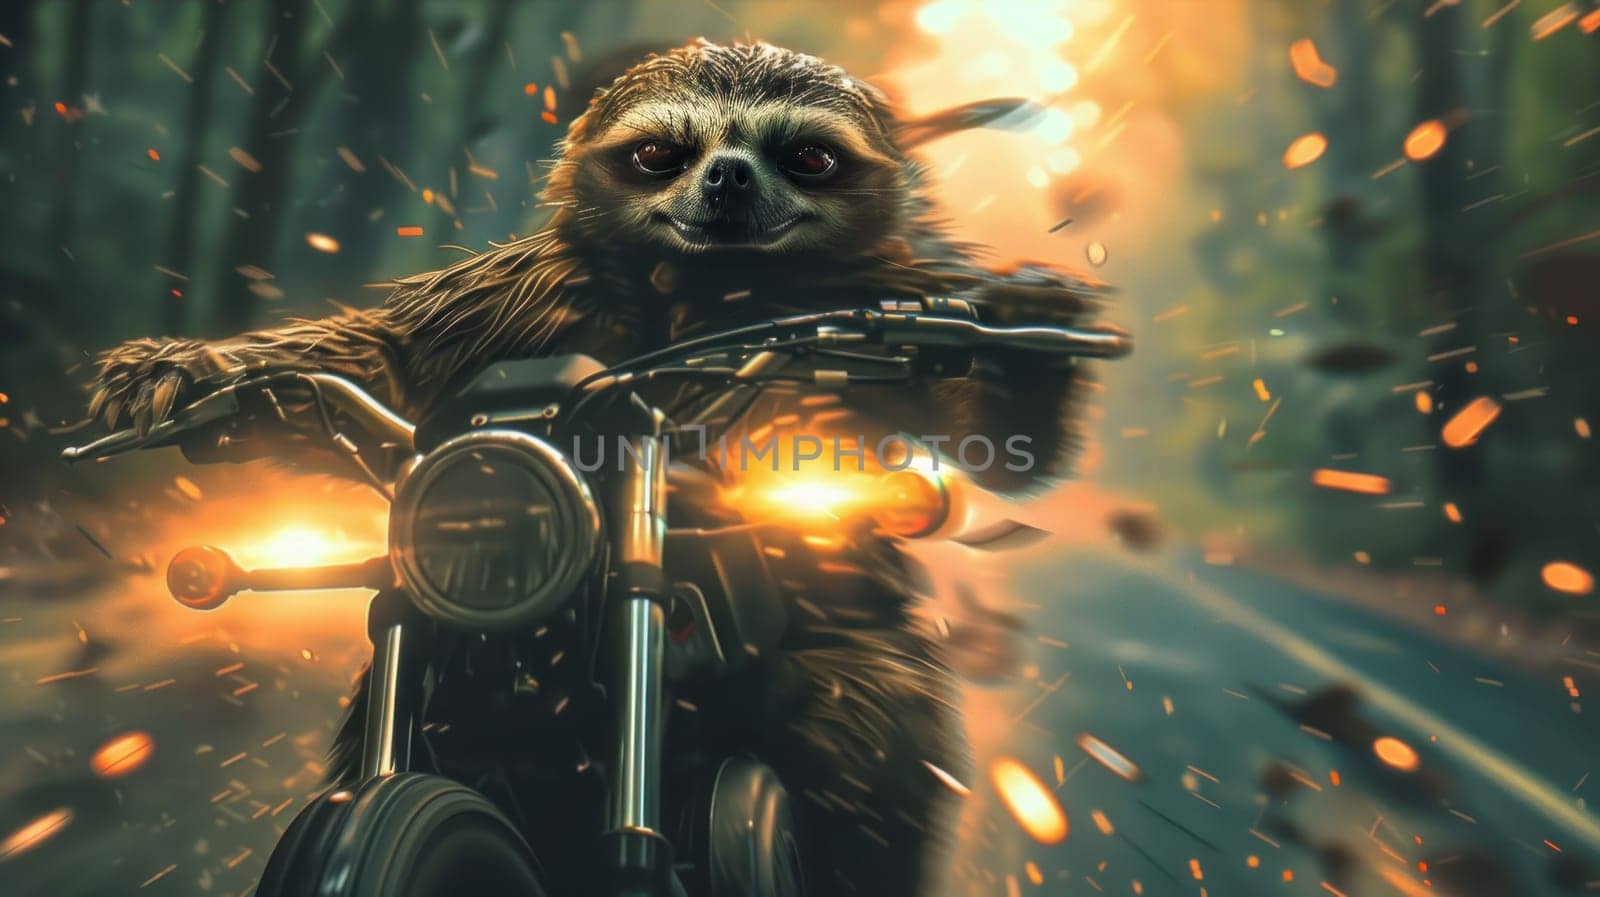 A sloth is riding a motorcycle with a helmet on by golfmerrymaker